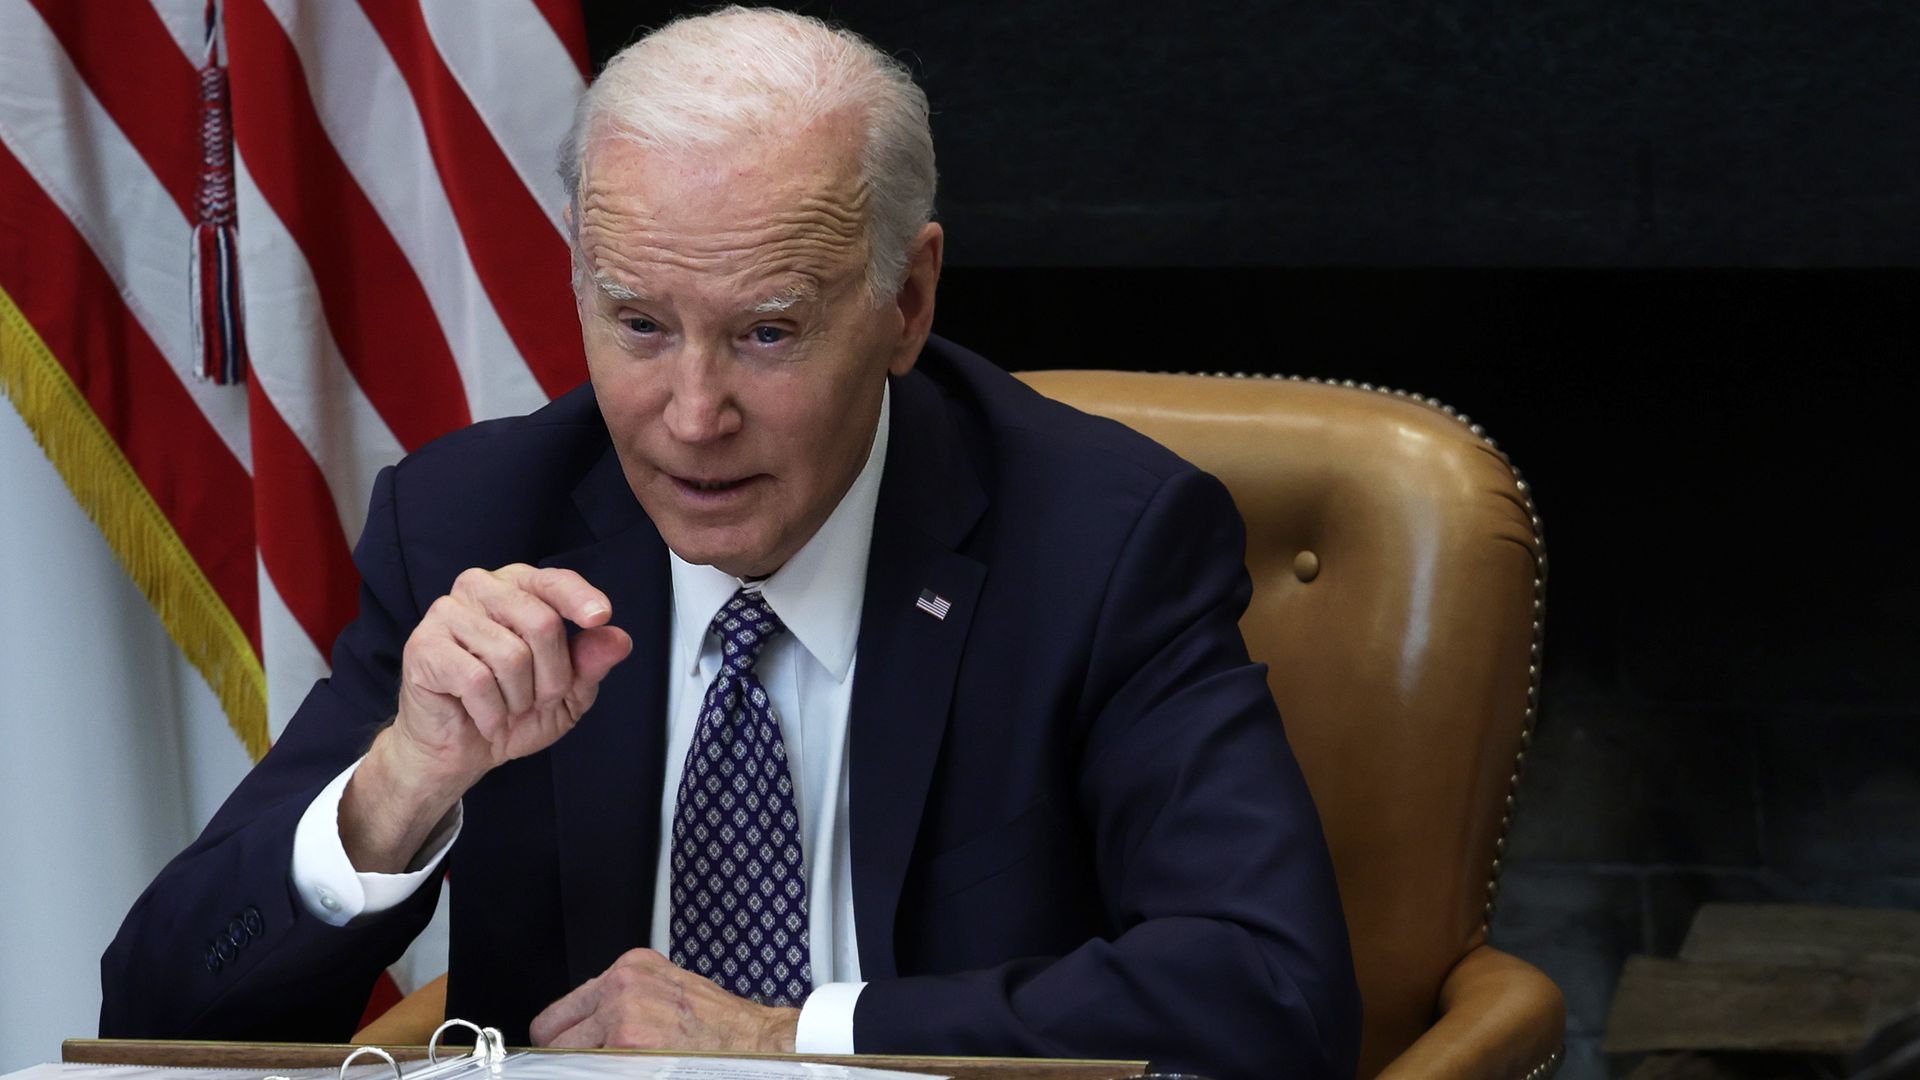 Joe Biden, wearing a blue suit and tie, and sitting in a leather chair, speaks to a group of people with an American flag in the background.